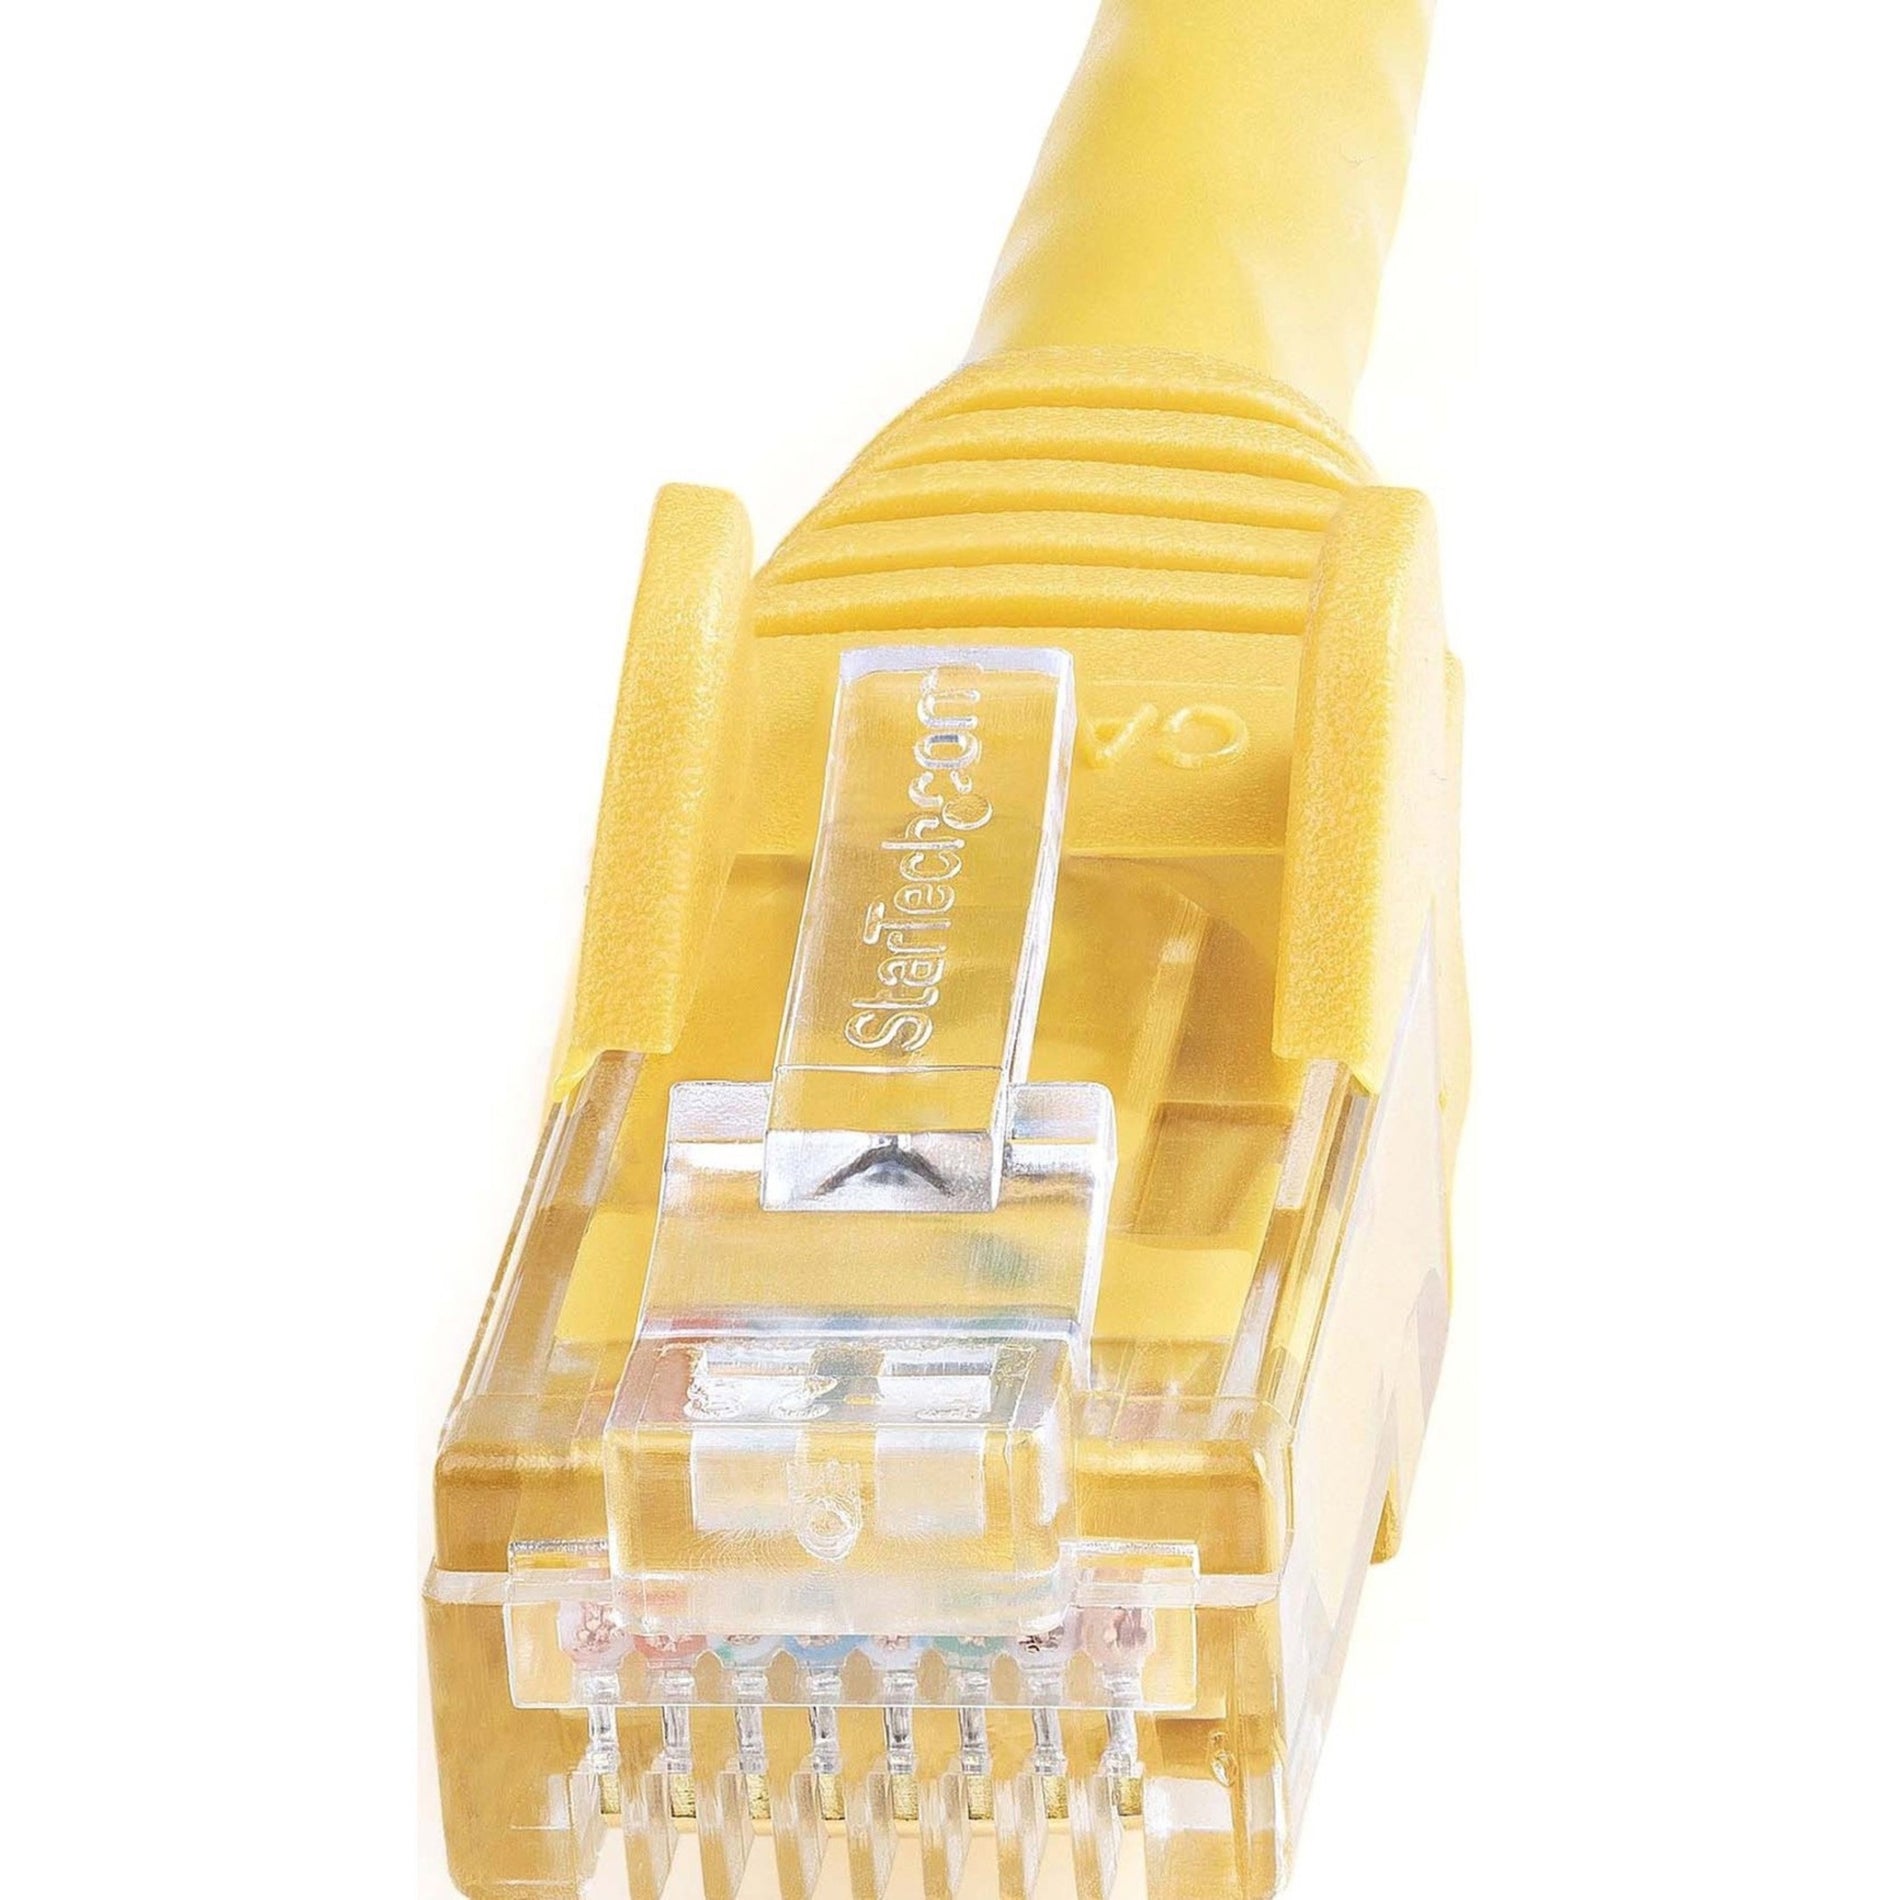 StarTech.com N6PATCH7YL 7 ft Yellow Snagless Cat6 UTP Patch Cable, Lifetime Warranty, ETL Verified